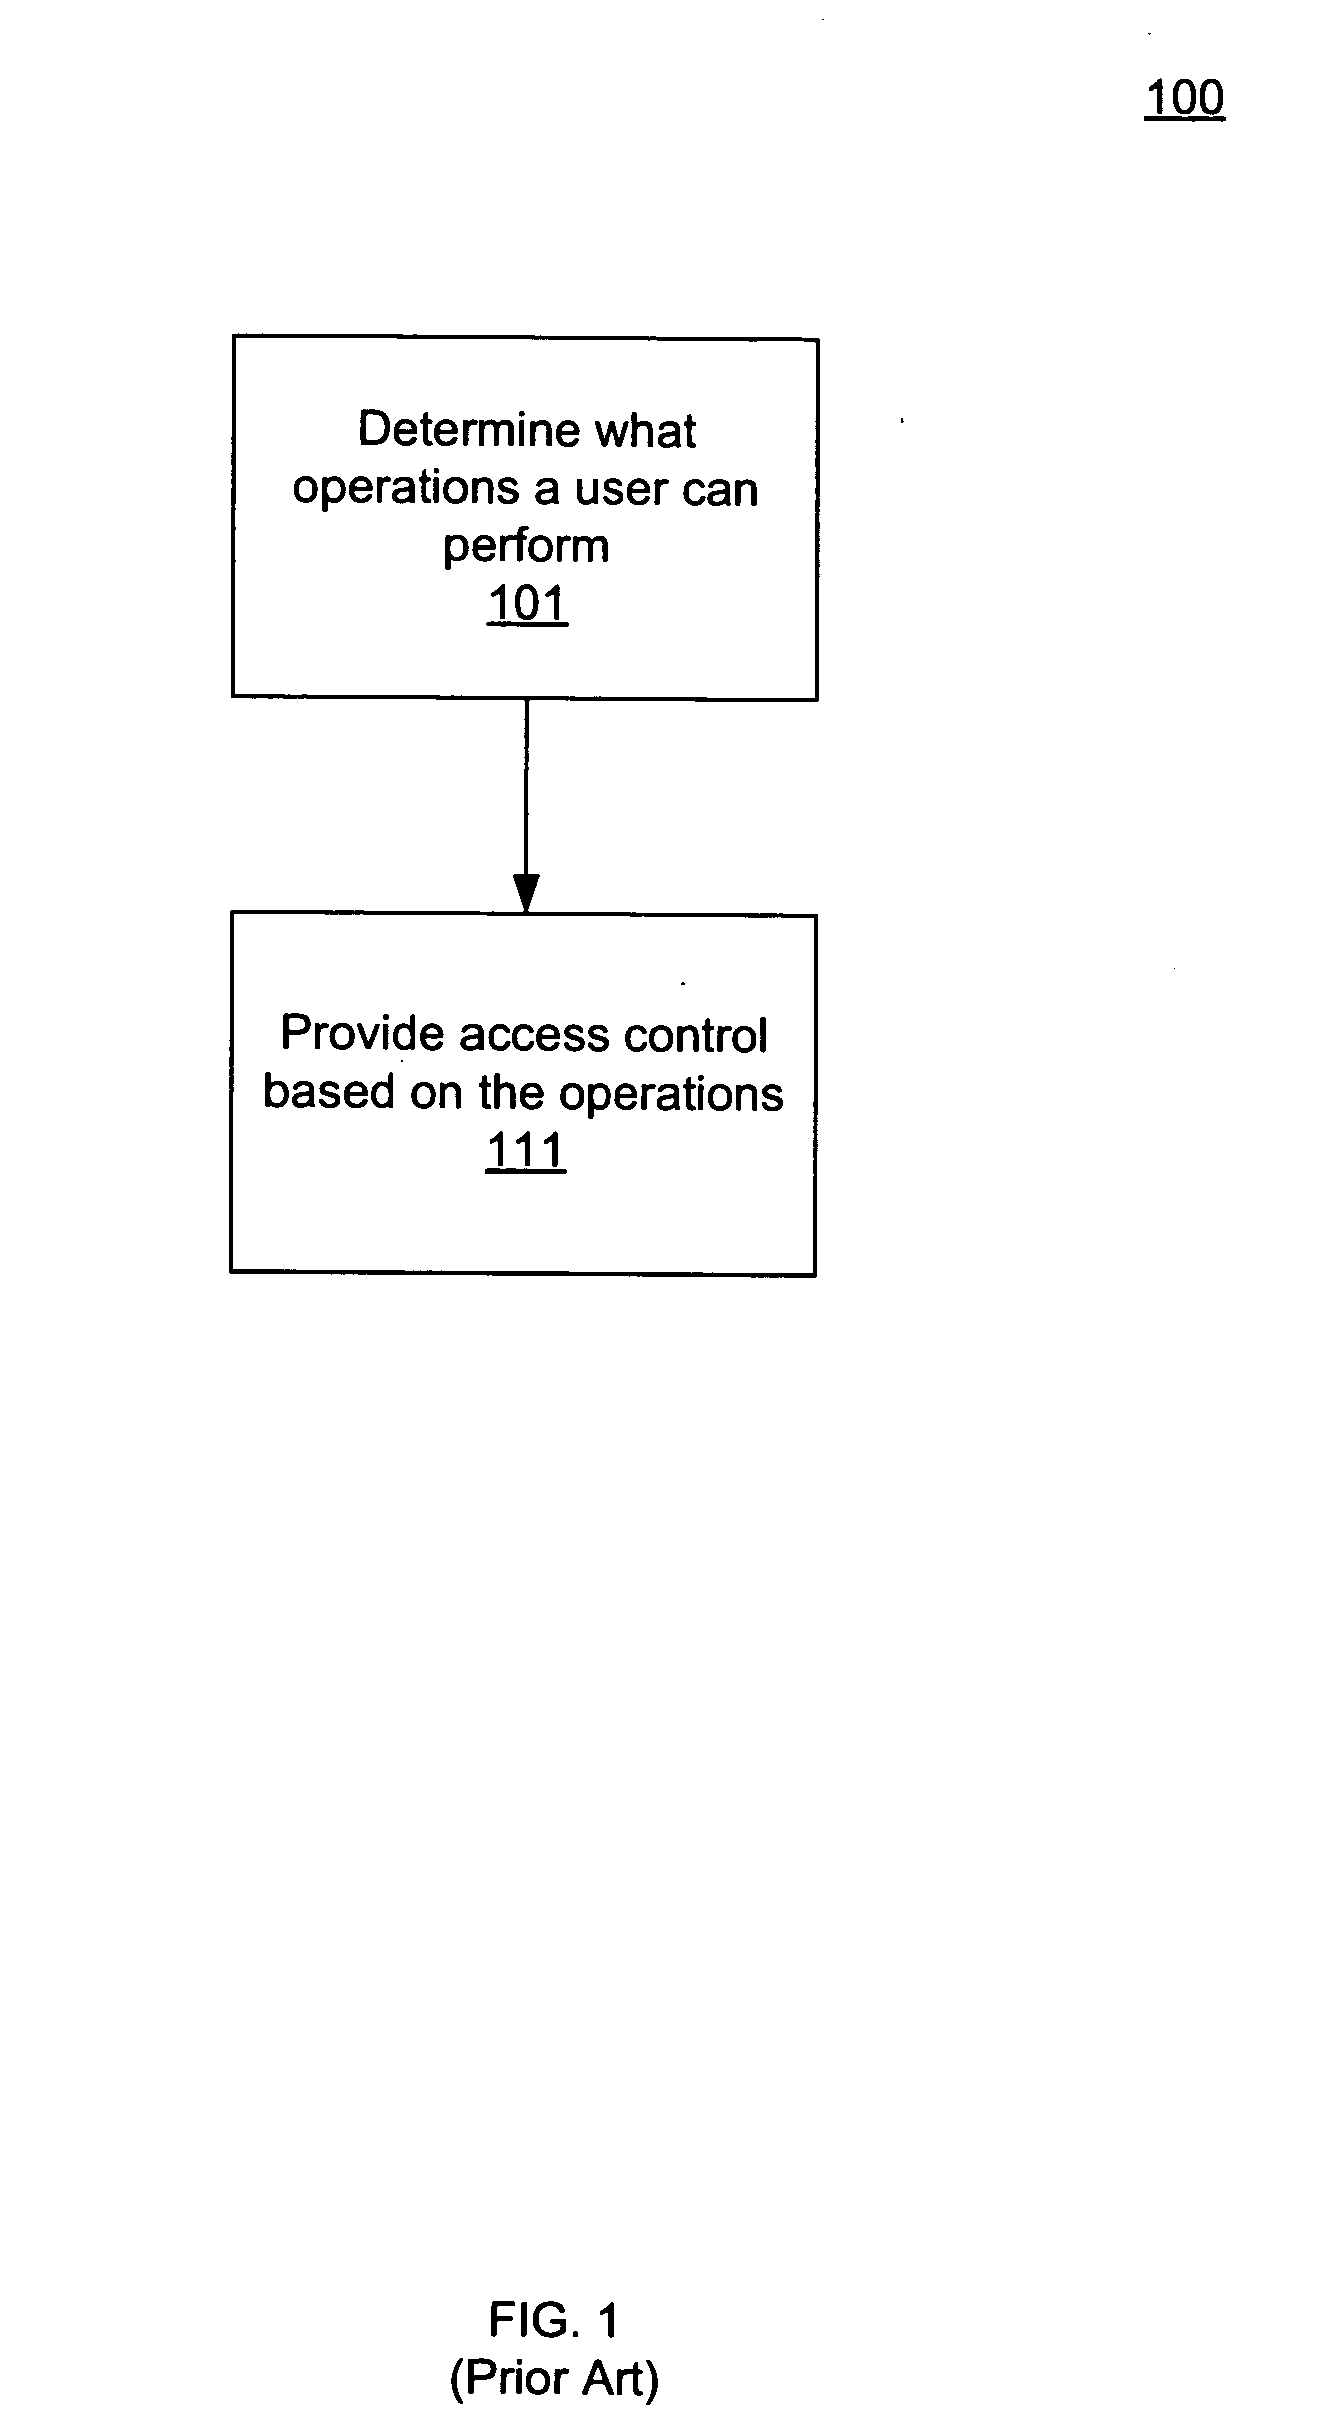 Resource level role based access control for storage management